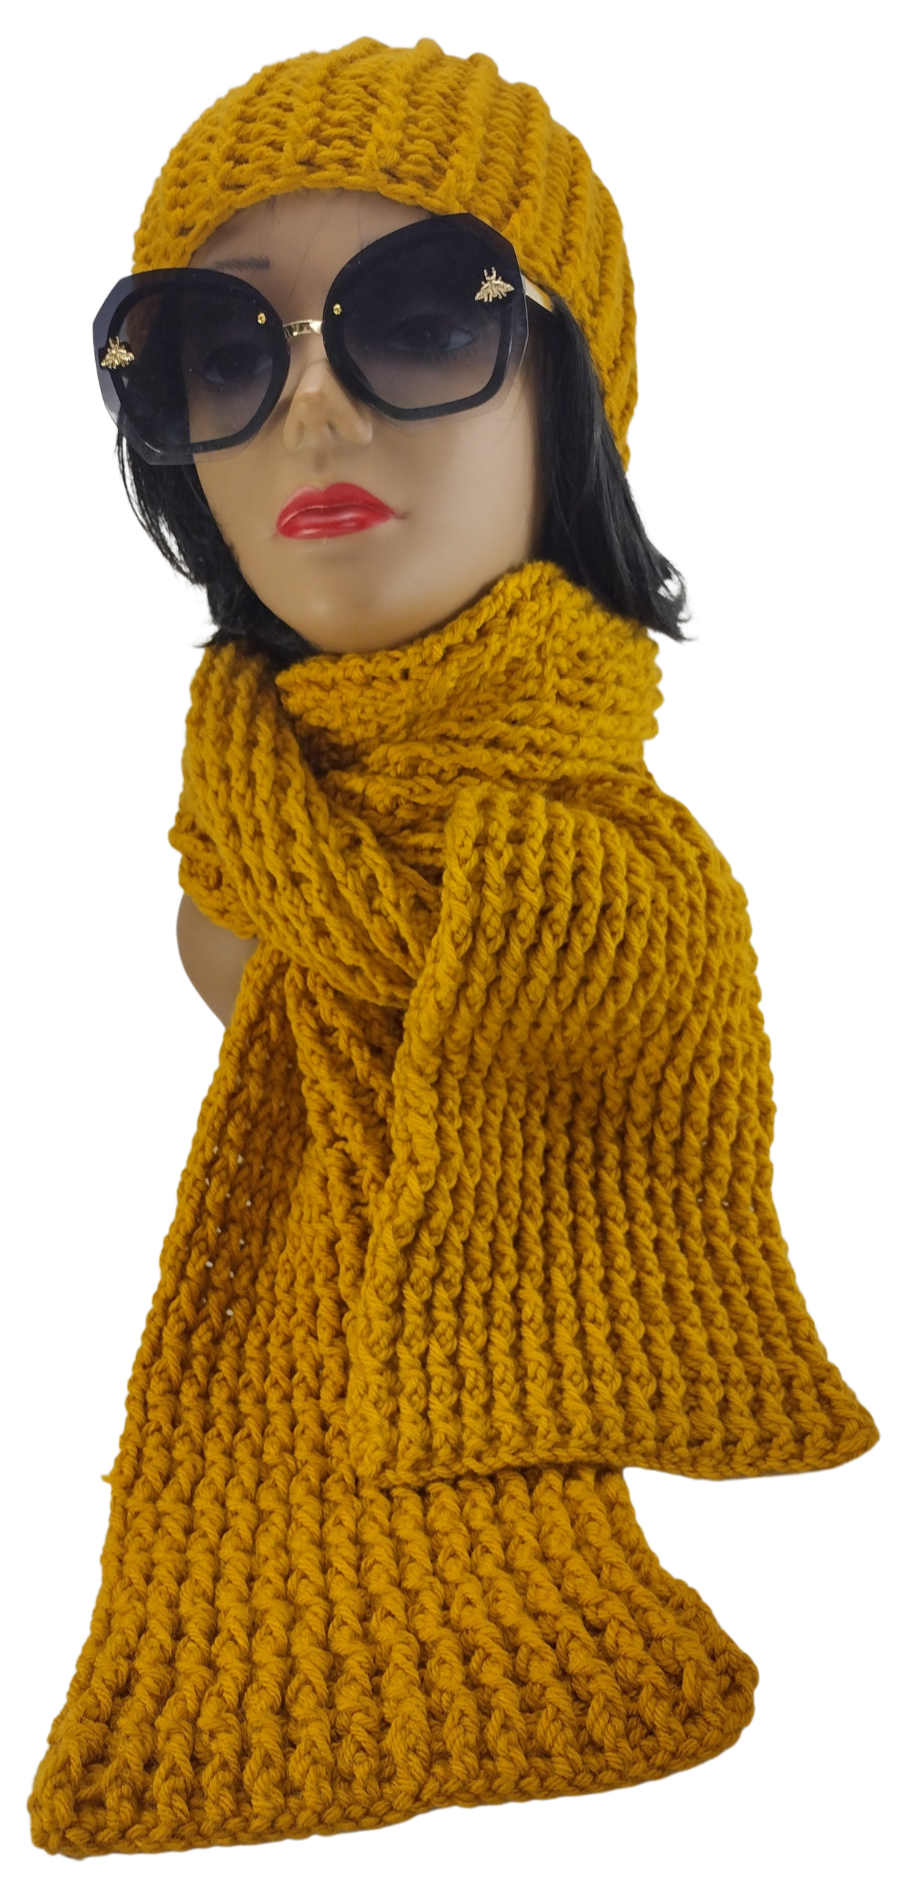 Crocheted Ribbed stitched Snug Fit adult Gold Beanie, Scarf Set, Great Gift For her of a gift for him